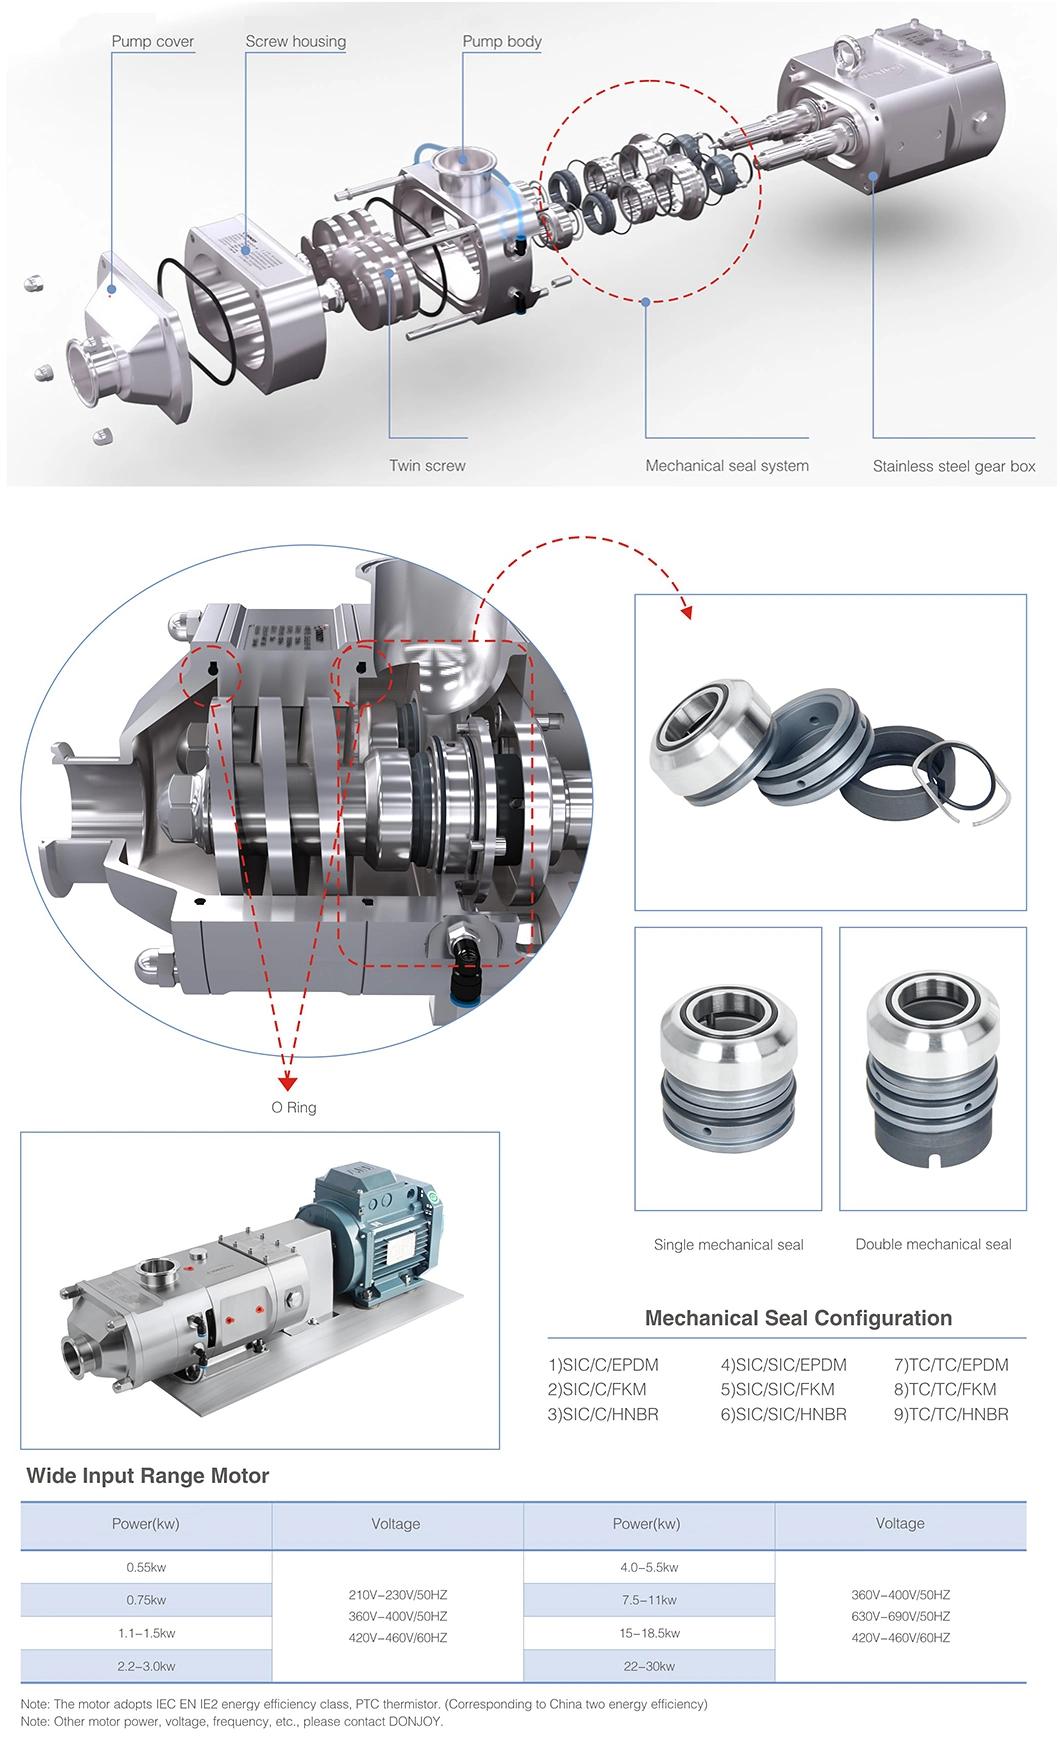 3A Certified Low Shear Twin Screw Pump for Food Beverage Processing